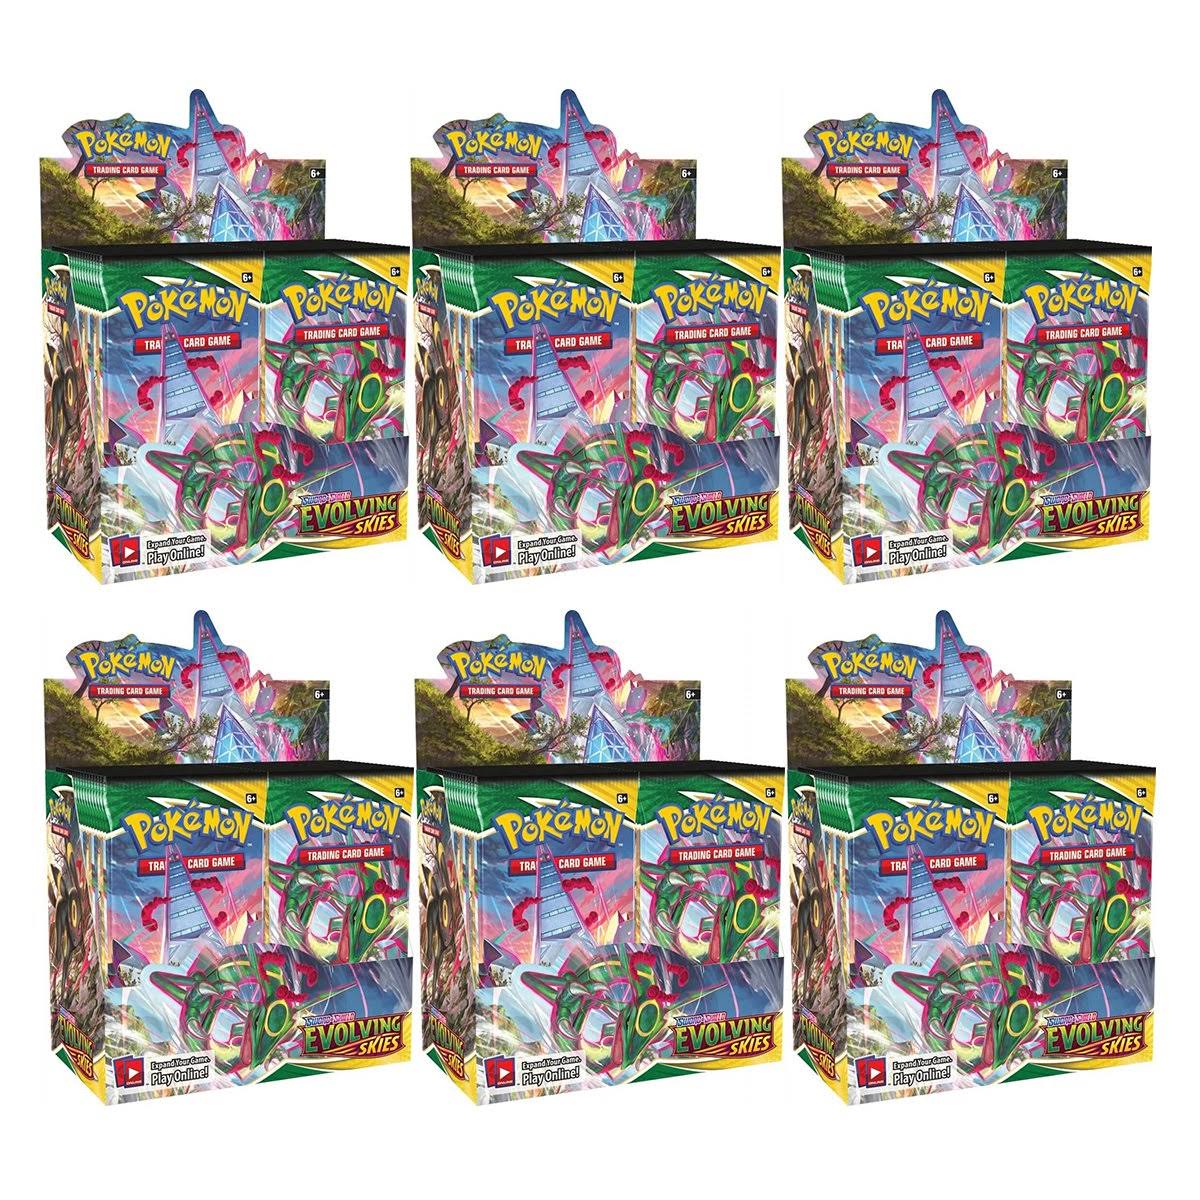 Pokemon TCG Sword and Shield Evolving Skies Booster Box x 6 in A Case